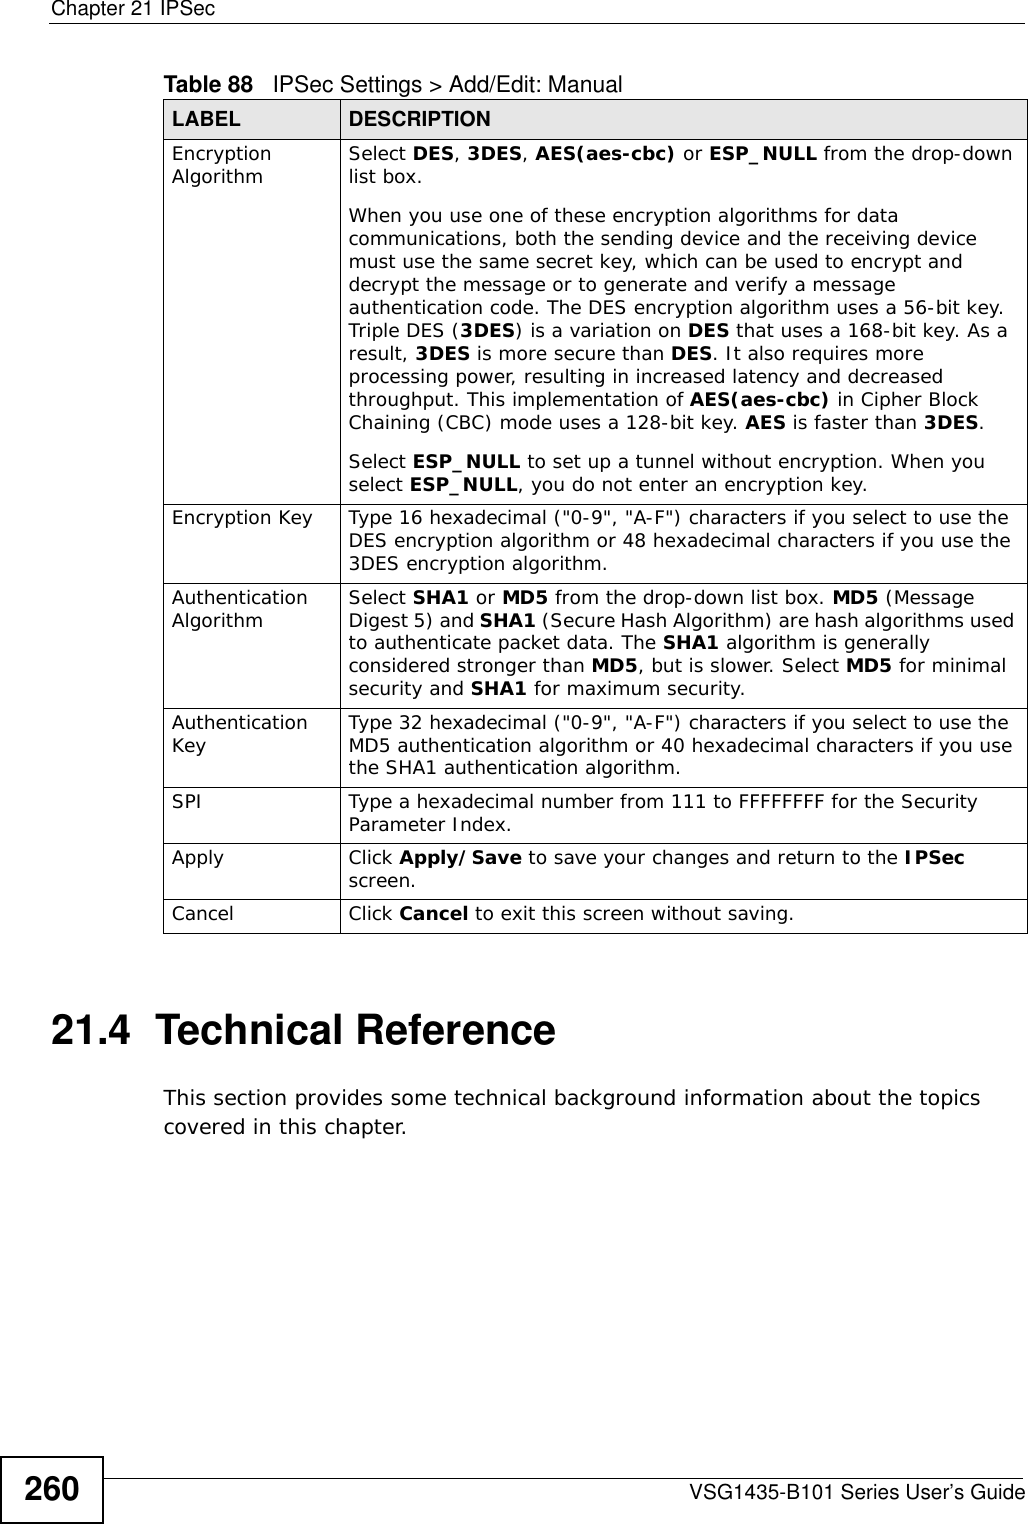 Chapter 21 IPSecVSG1435-B101 Series User’s Guide26021.4  Technical ReferenceThis section provides some technical background information about the topics covered in this chapter.Encryption Algorithm Select DES, 3DES, AES(aes-cbc) or ESP_NULL from the drop-down list box. When you use one of these encryption algorithms for data communications, both the sending device and the receiving device must use the same secret key, which can be used to encrypt and decrypt the message or to generate and verify a message authentication code. The DES encryption algorithm uses a 56-bit key. Triple DES (3DES) is a variation on DES that uses a 168-bit key. As a result, 3DES is more secure than DES. It also requires more processing power, resulting in increased latency and decreased throughput. This implementation of AES(aes-cbc) in Cipher Block Chaining (CBC) mode uses a 128-bit key. AES is faster than 3DES. Select ESP_NULL to set up a tunnel without encryption. When you select ESP_NULL, you do not enter an encryption key.Encryption Key  Type 16 hexadecimal (&quot;0-9&quot;, &quot;A-F&quot;) characters if you select to use the DES encryption algorithm or 48 hexadecimal characters if you use the 3DES encryption algorithm.Authentication Algorithm Select SHA1 or MD5 from the drop-down list box. MD5 (Message Digest 5) and SHA1 (Secure Hash Algorithm) are hash algorithms used to authenticate packet data. The SHA1 algorithm is generally considered stronger than MD5, but is slower. Select MD5 for minimal security and SHA1 for maximum security. Authentication Key  Type 32 hexadecimal (&quot;0-9&quot;, &quot;A-F&quot;) characters if you select to use the MD5 authentication algorithm or 40 hexadecimal characters if you use the SHA1 authentication algorithm.SPI Type a hexadecimal number from 111 to FFFFFFFF for the Security Parameter Index.Apply Click Apply/Save to save your changes and return to the IPSec screen.Cancel Click Cancel to exit this screen without saving.Table 88   IPSec Settings &gt; Add/Edit: ManualLABEL DESCRIPTION